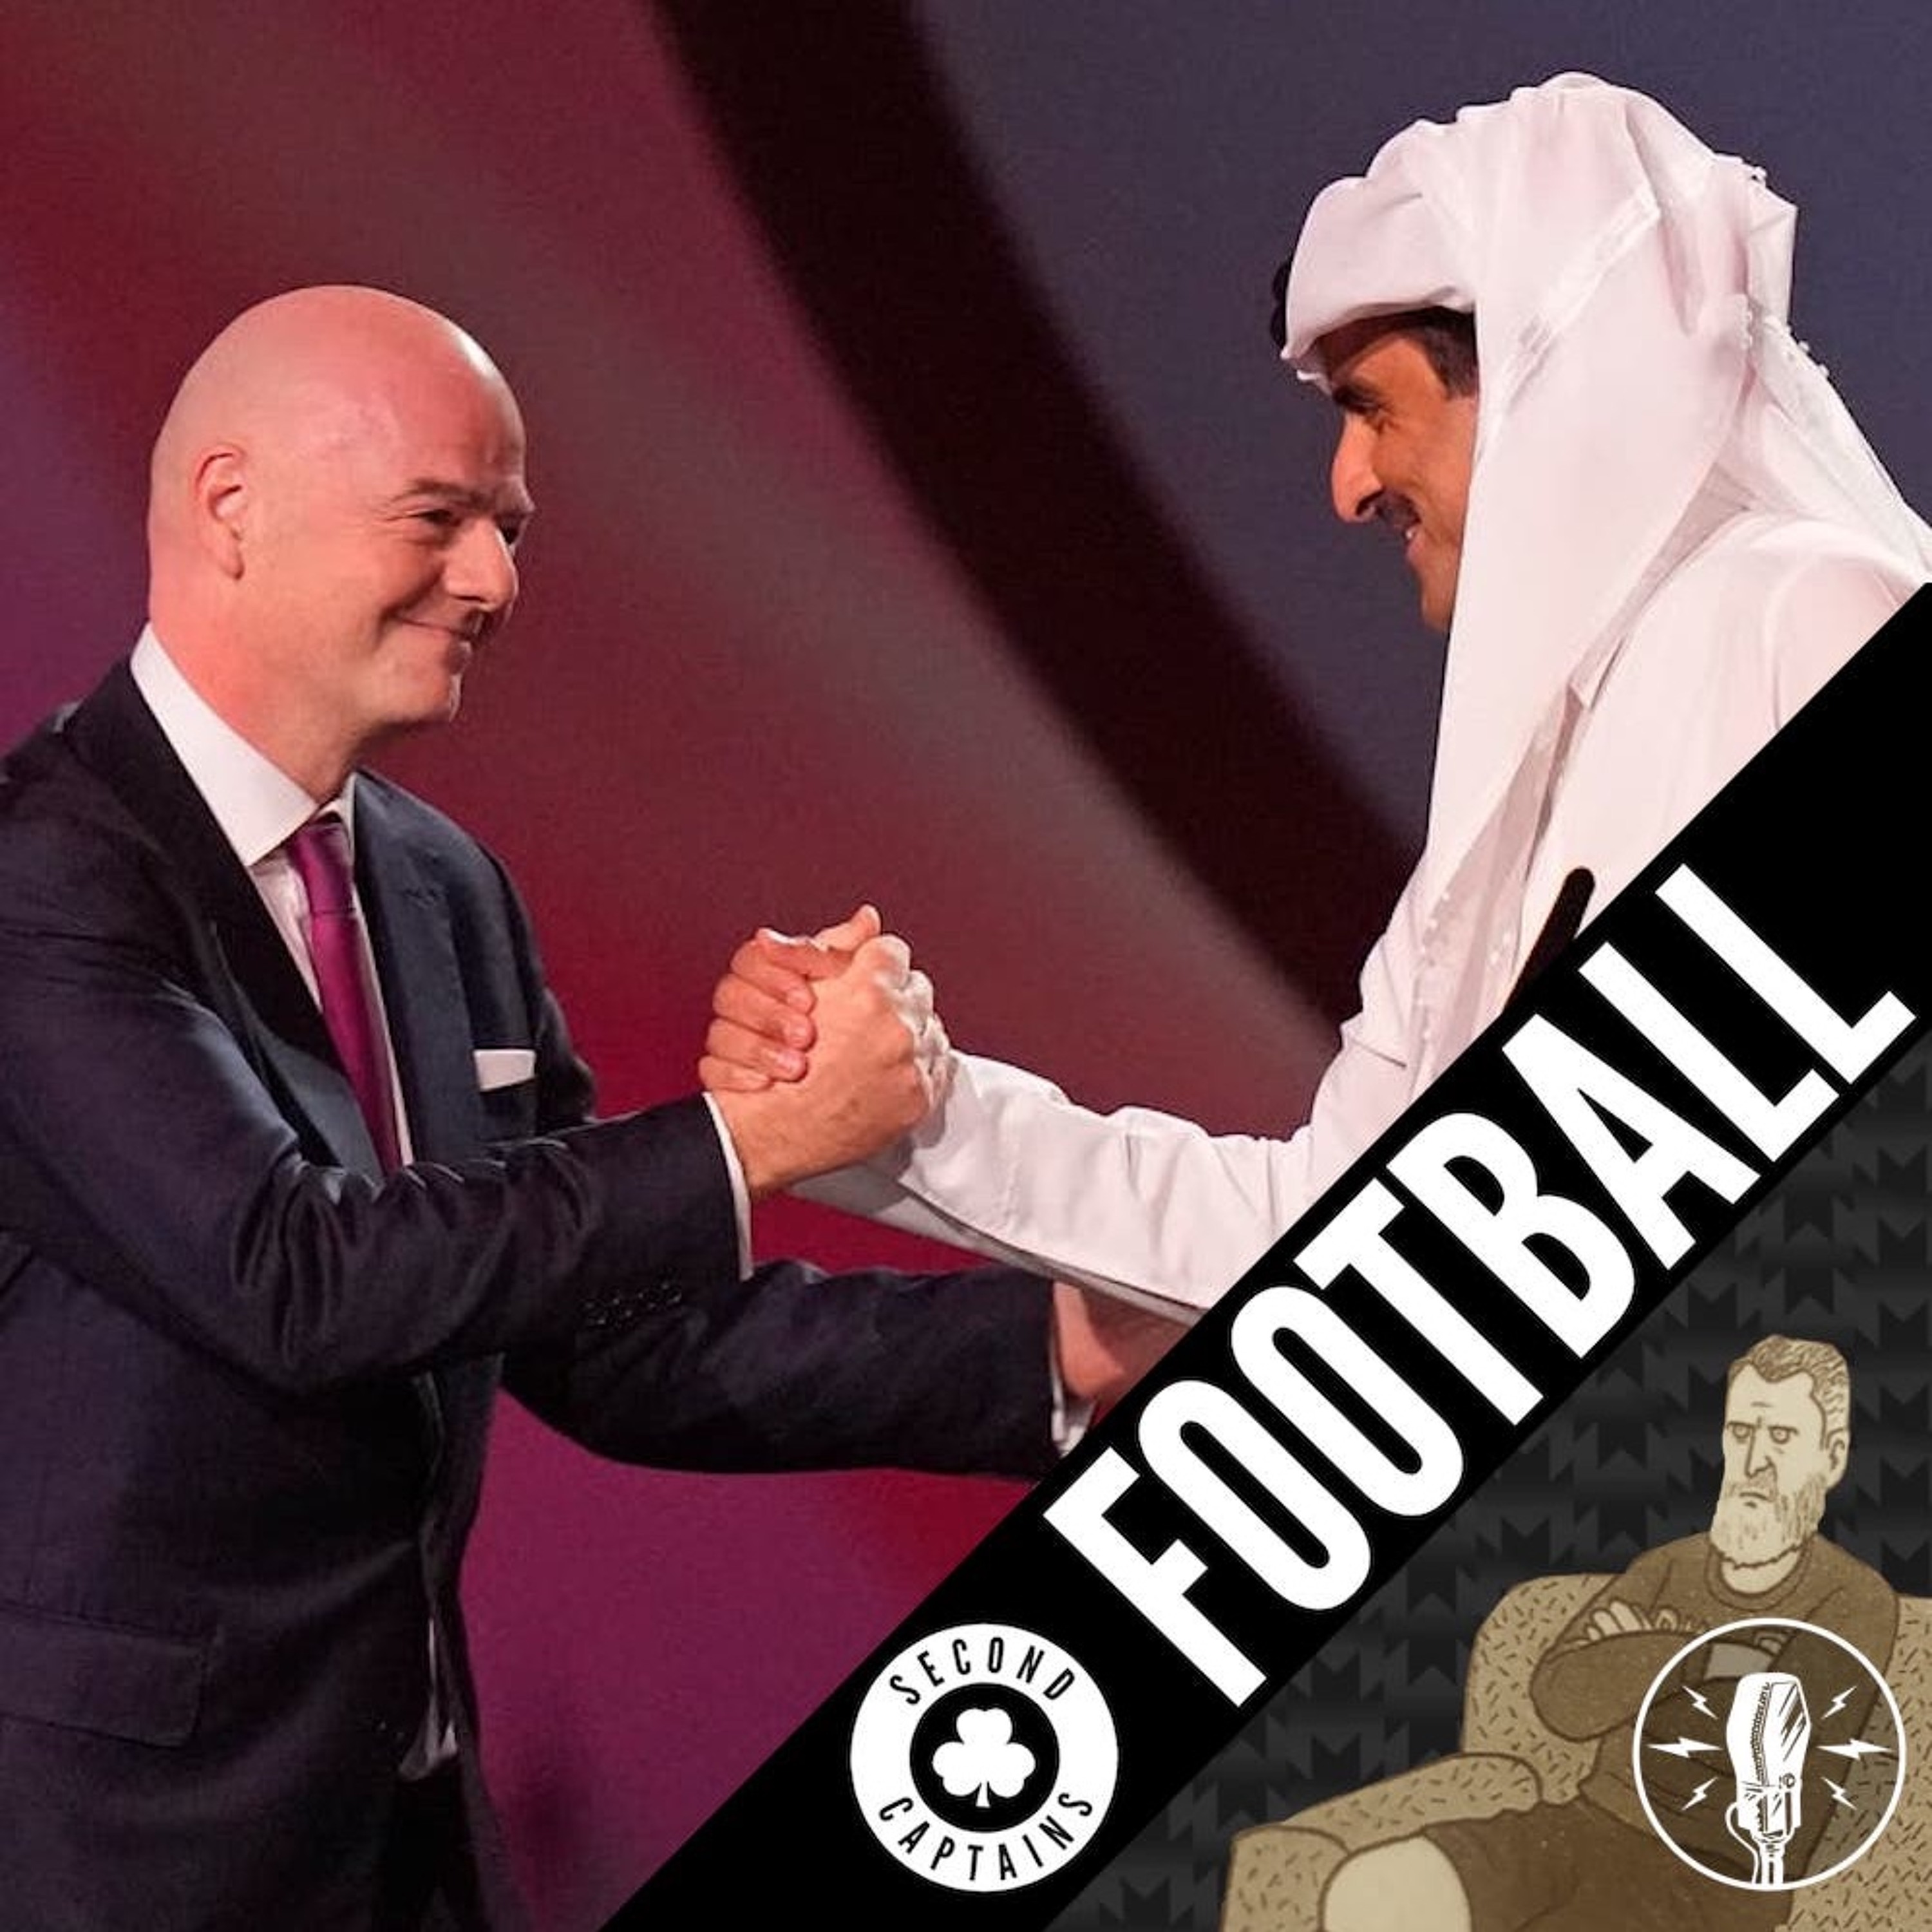 Ep 2300: World Cup Draw And Qatar's Tone Shift, Mol An Óige, Frank's New Direction - 04/04/22